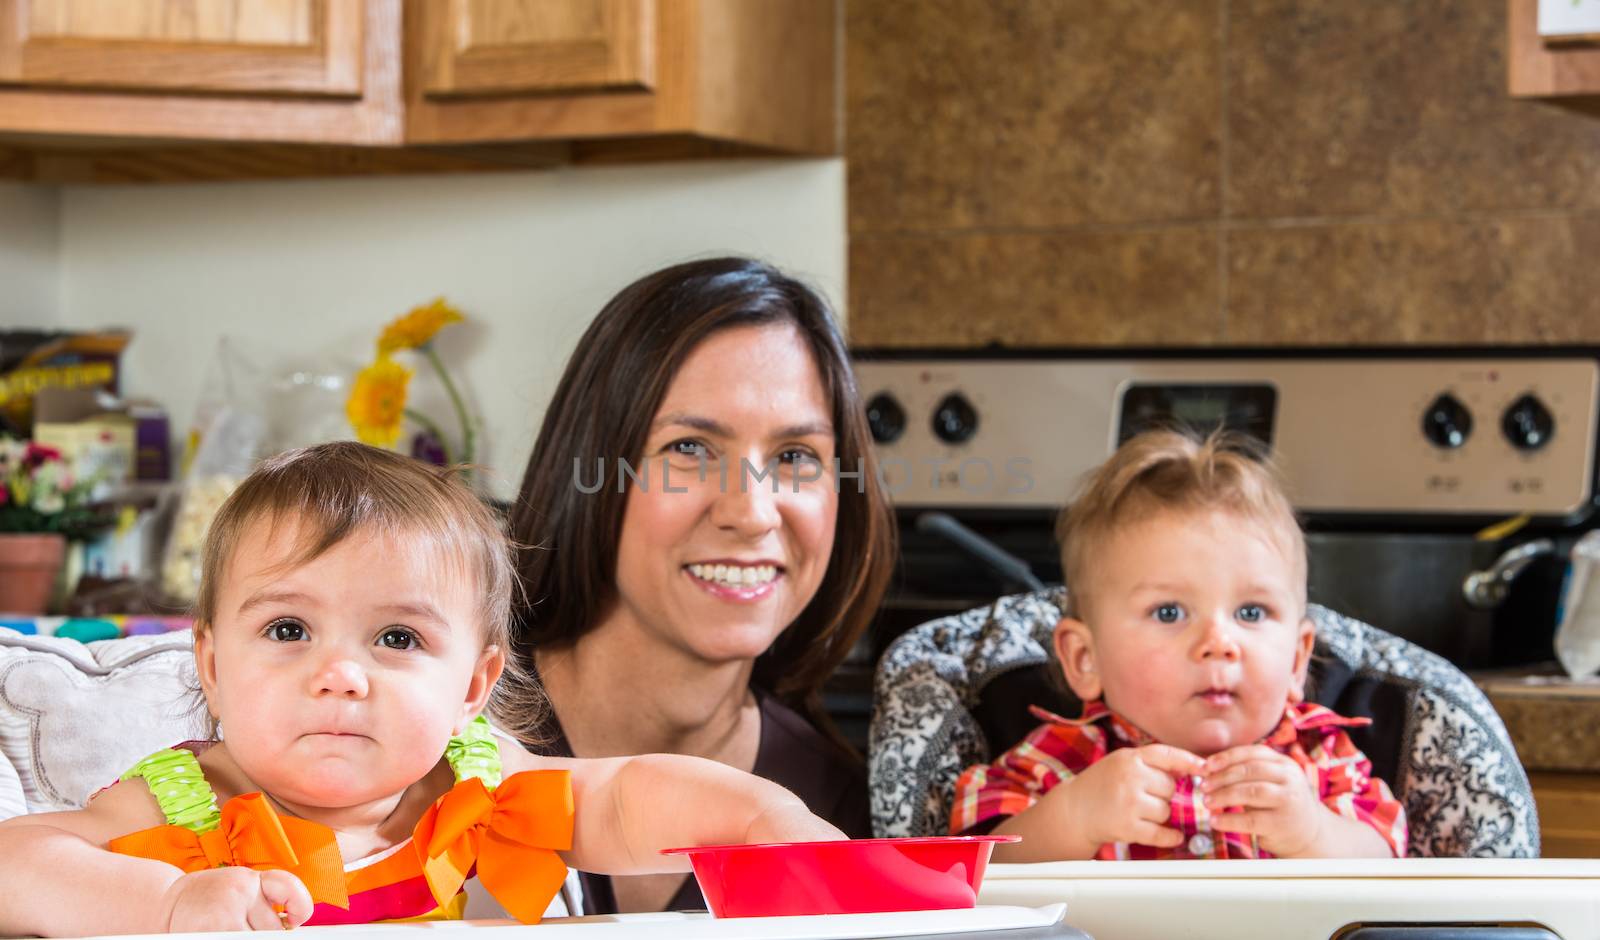 A mother in the kitchen poses with babies